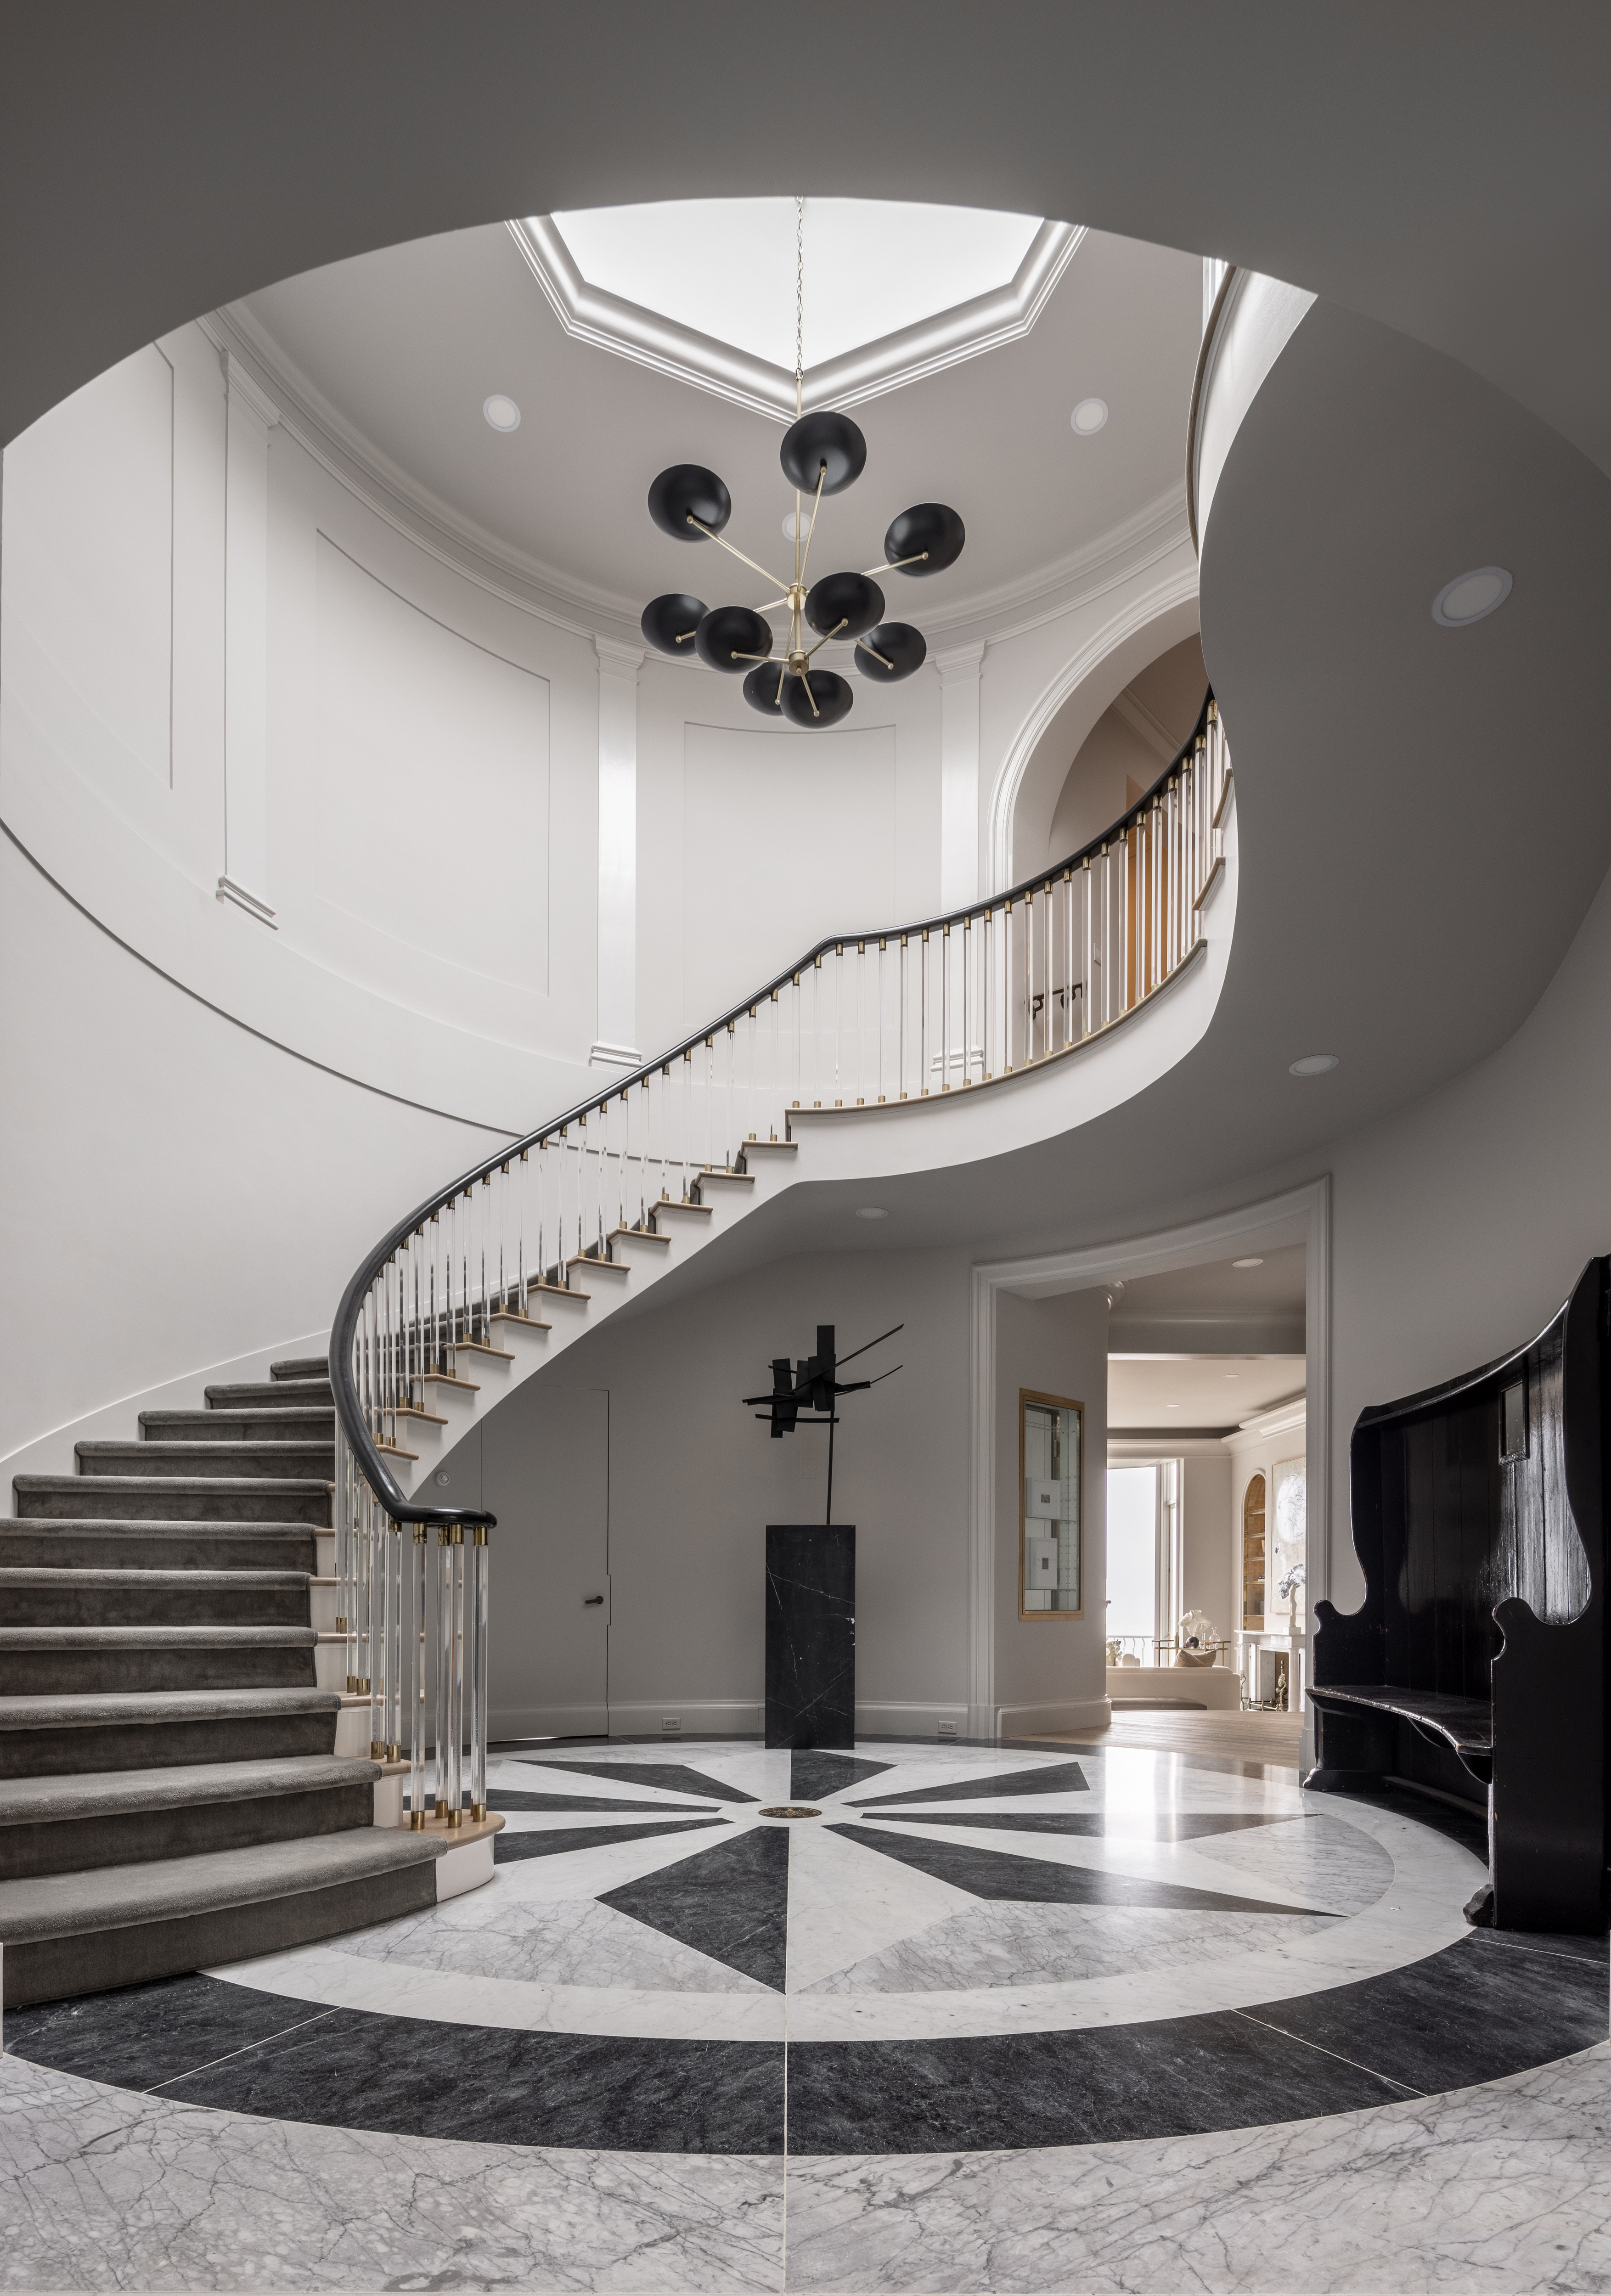 The image shows a grand, modern foyer with a curved staircase, black-and-white geometric marble floor, circular chandelier, and minimalist décor in neutral tones.